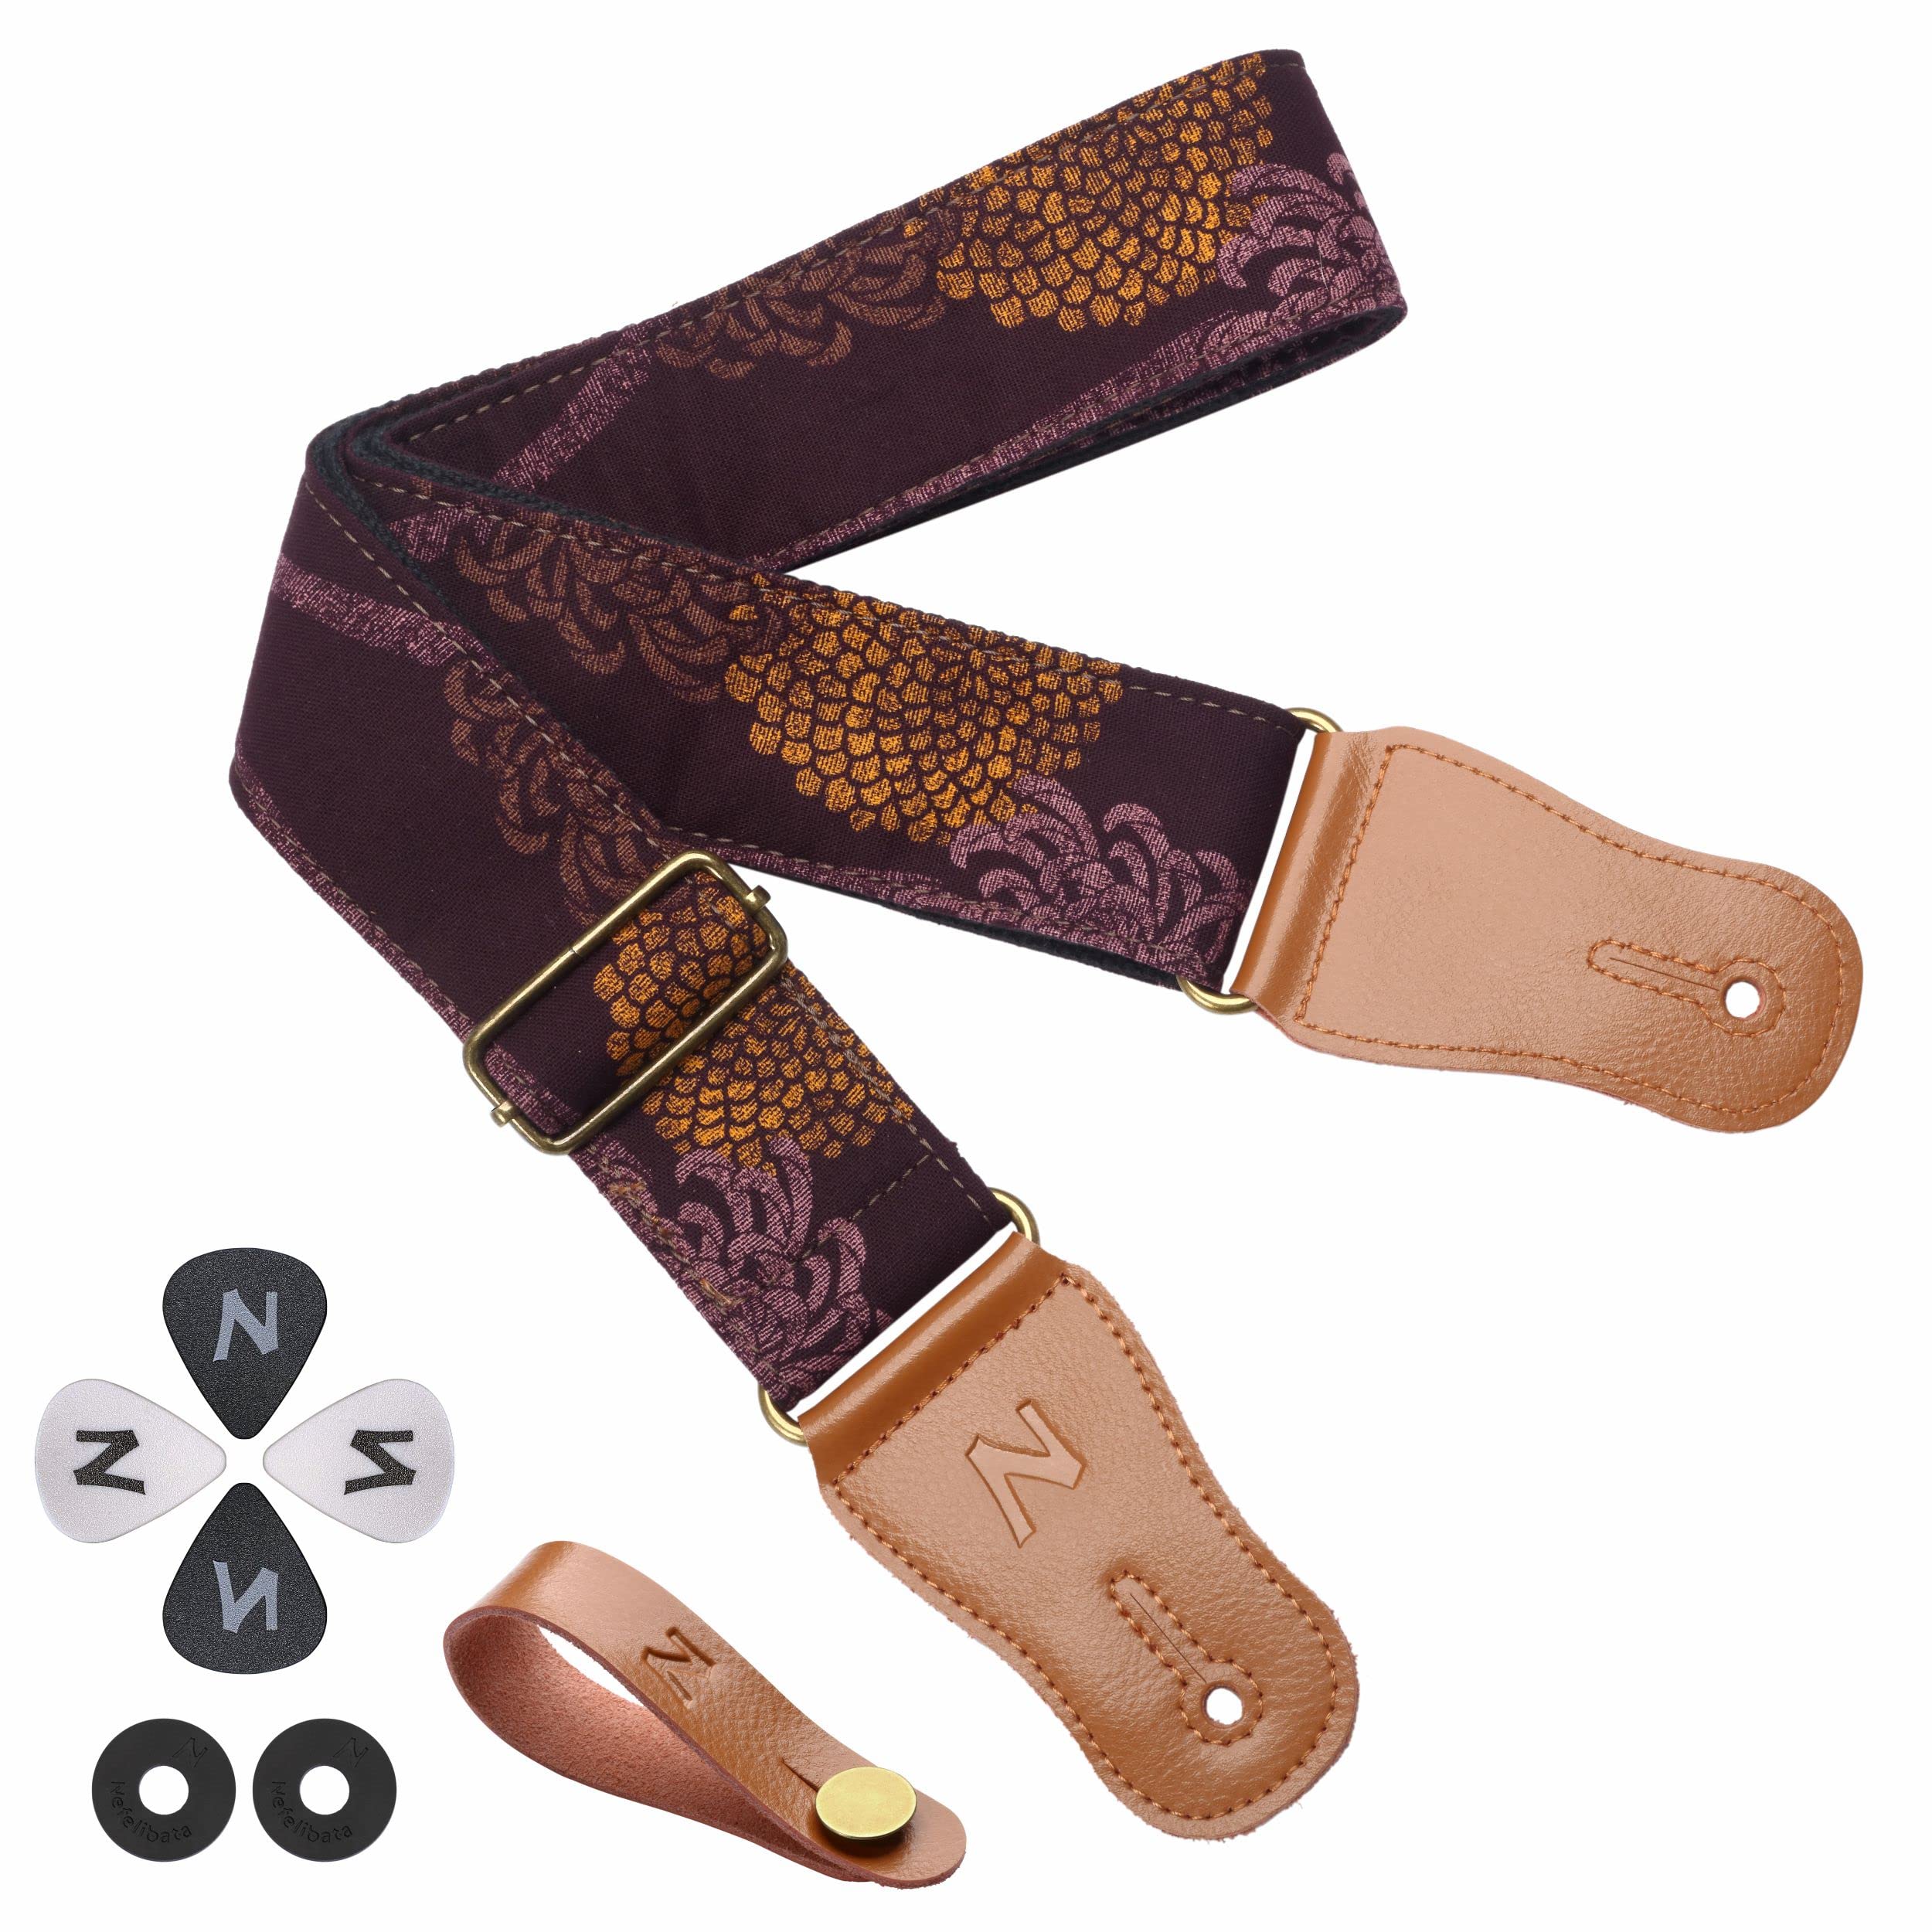 Nefelibata guitar Strap,Hot-Bronzing cotton Acoustic guitars Straps with genuine Leather Ends for Electric guitar,Bass & Ukulele